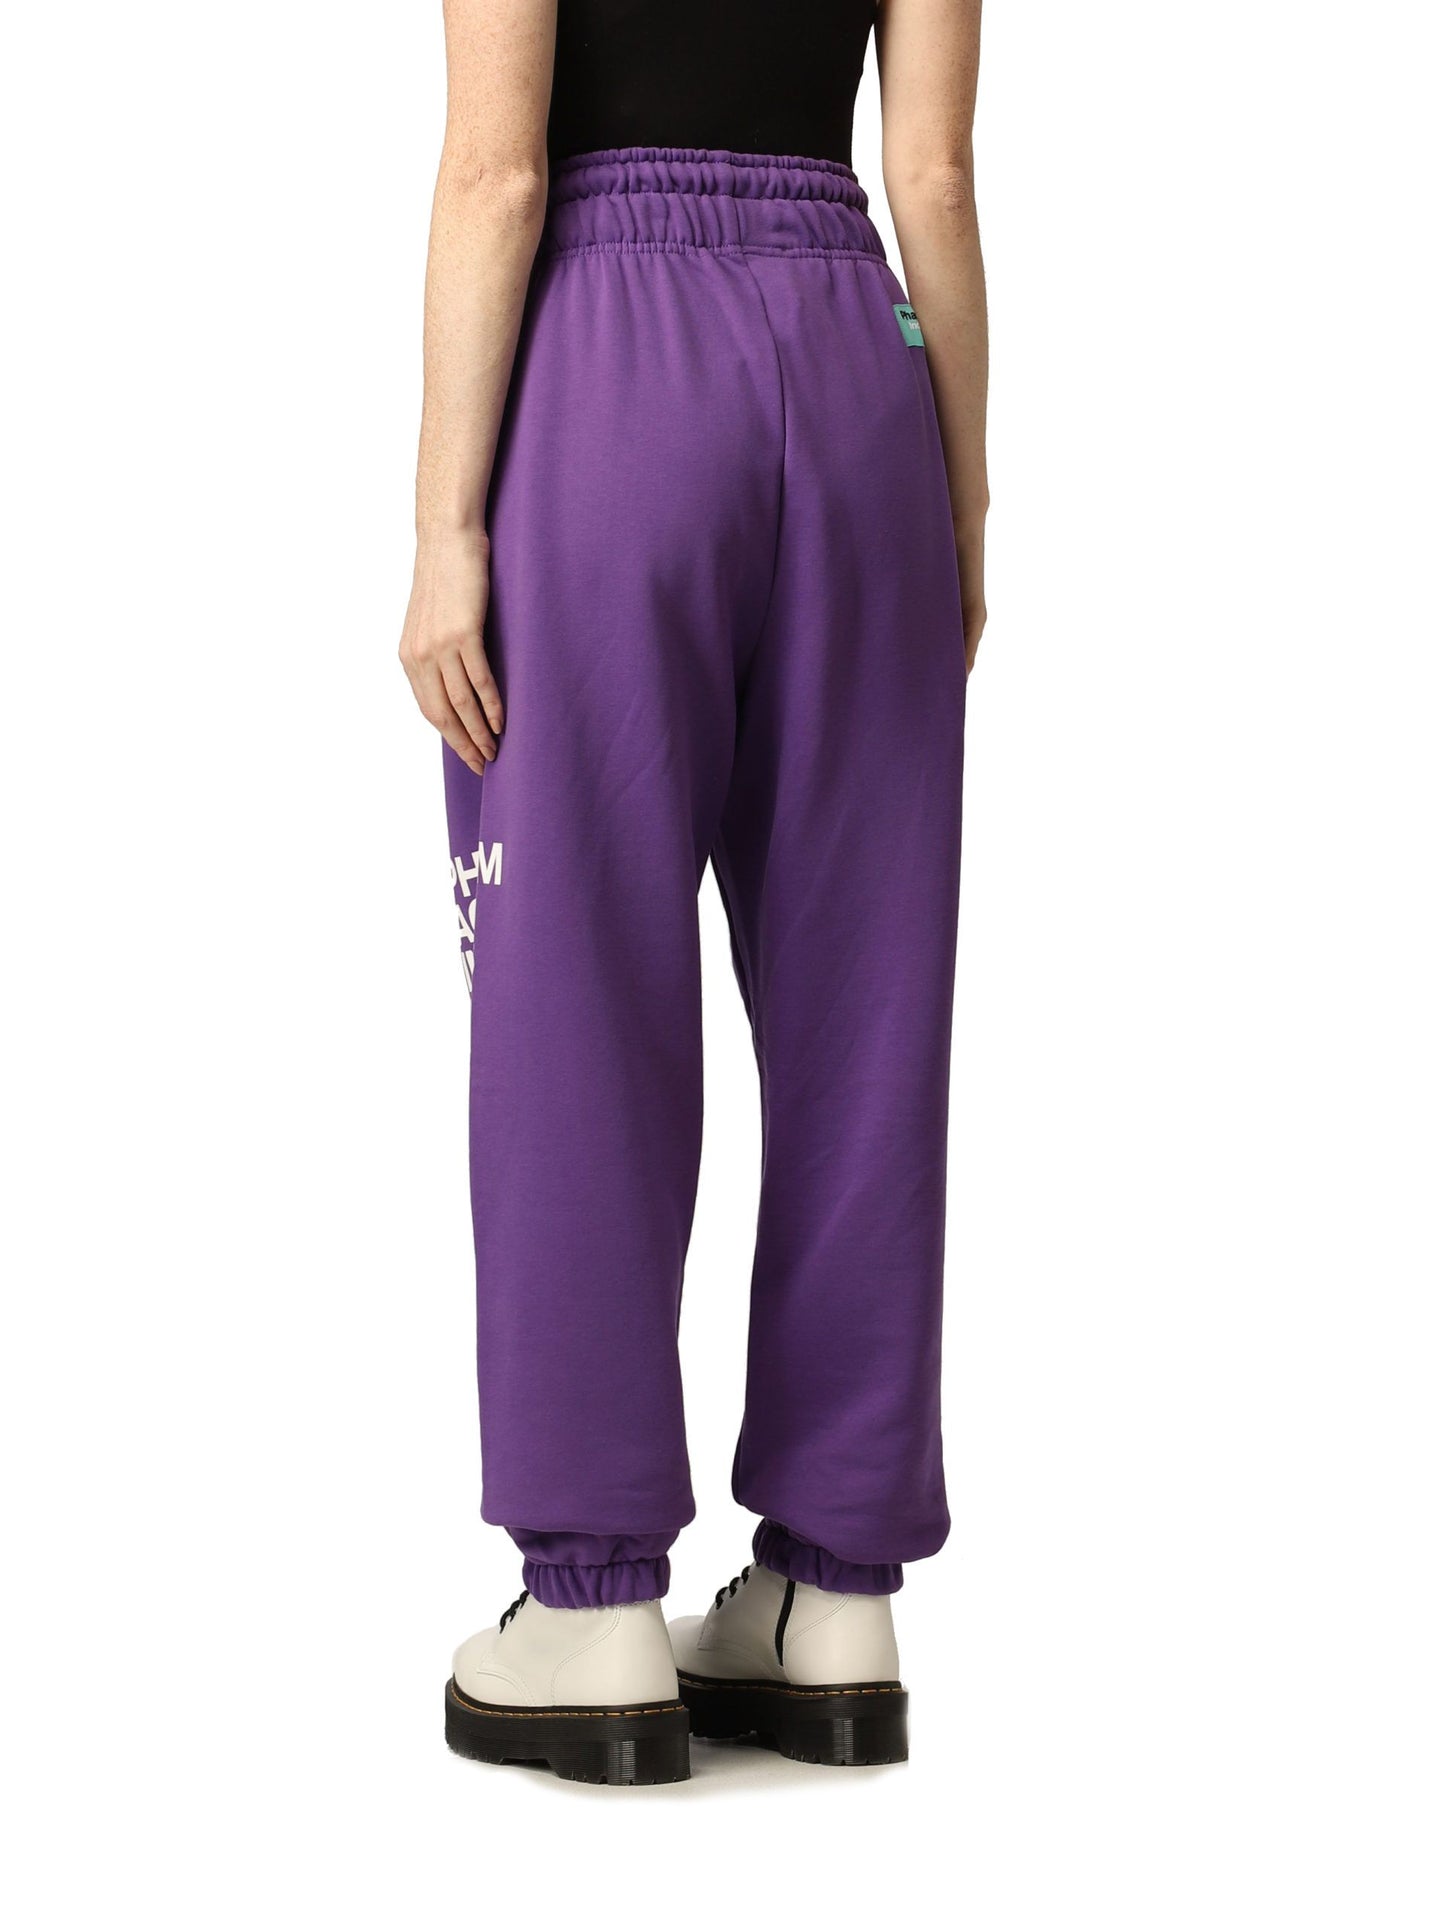 Pharmacy Industry Chic Logo-Printed Drawstring Tracksuit Trousers